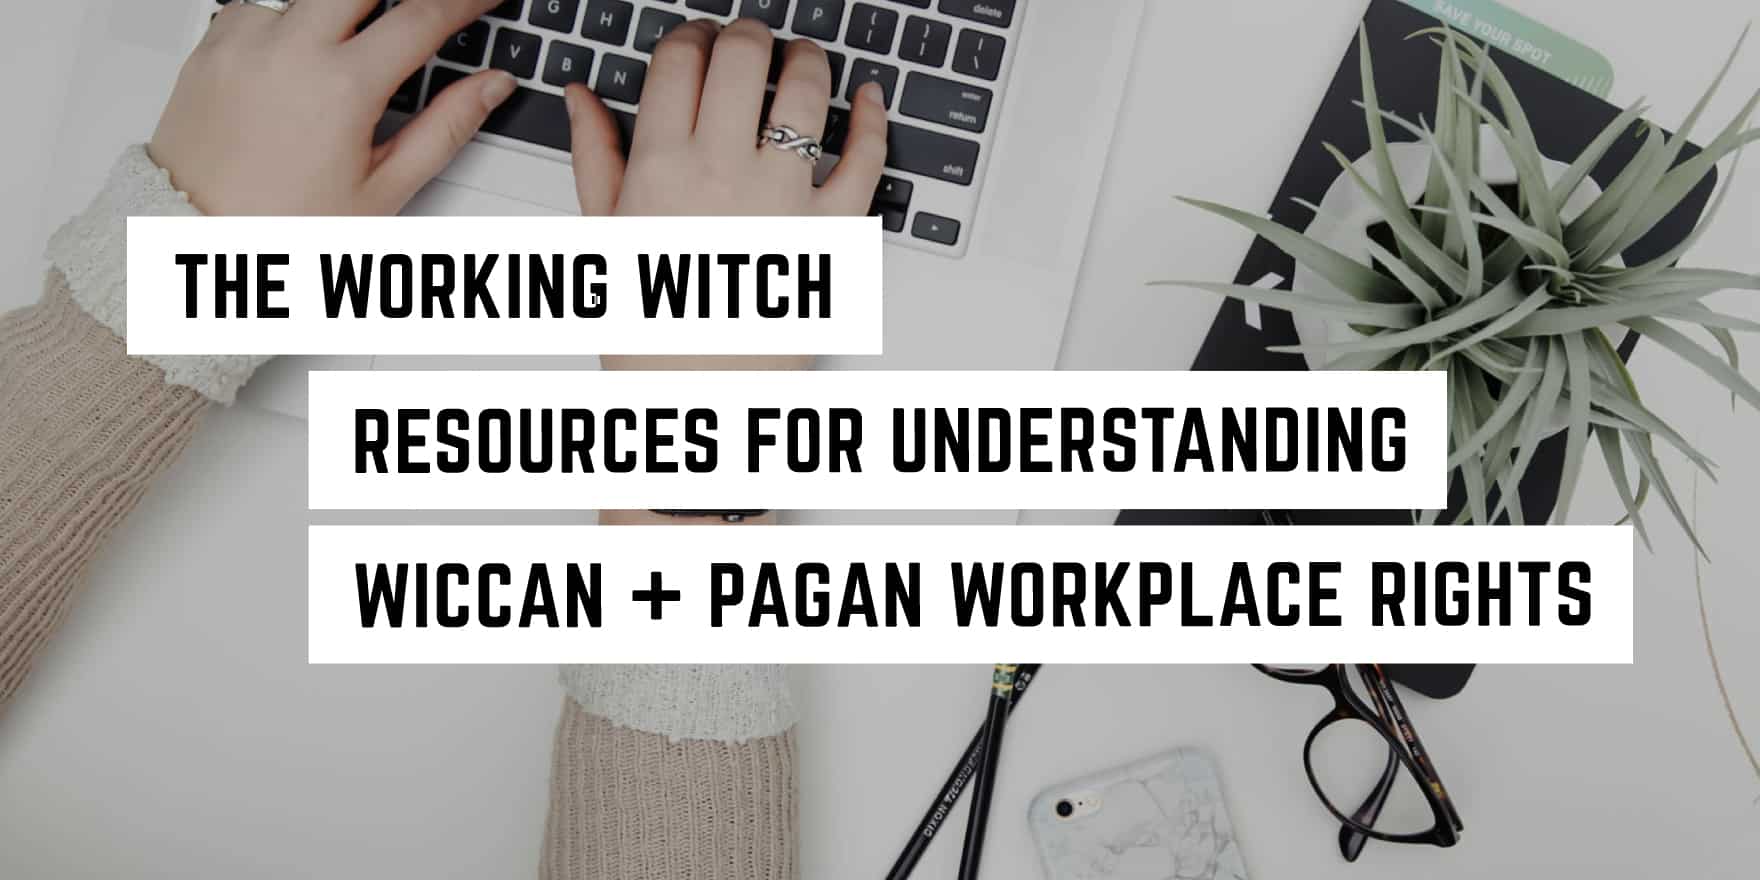 A modern professional setting with a touch of greenery, where someone is typing on a laptop near a succulent plant, alongside a message about empowering witchy and pagan practitioners with knowledge of their workplace rights